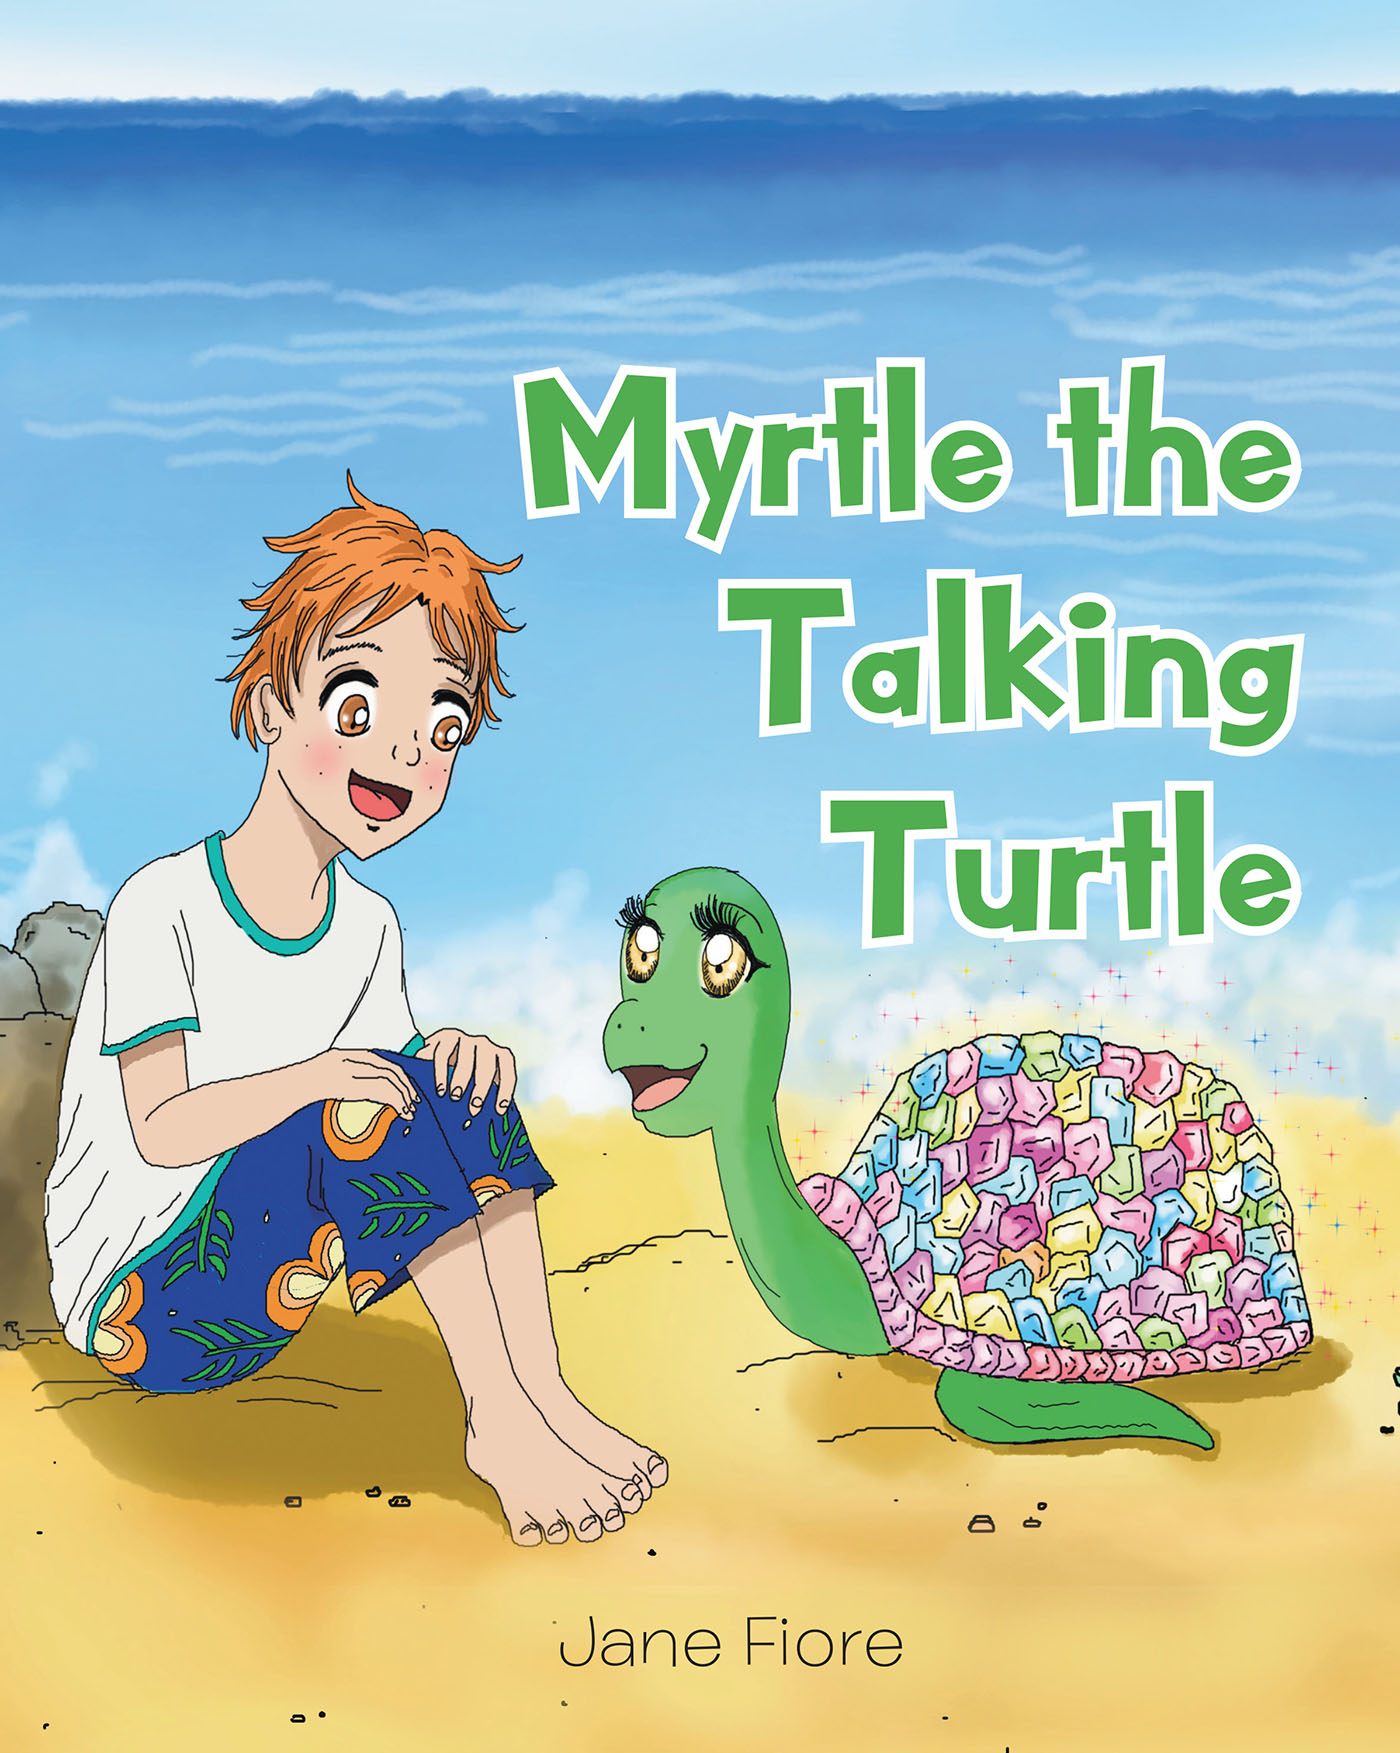 Myrtle the Talking Turtle Cover Image